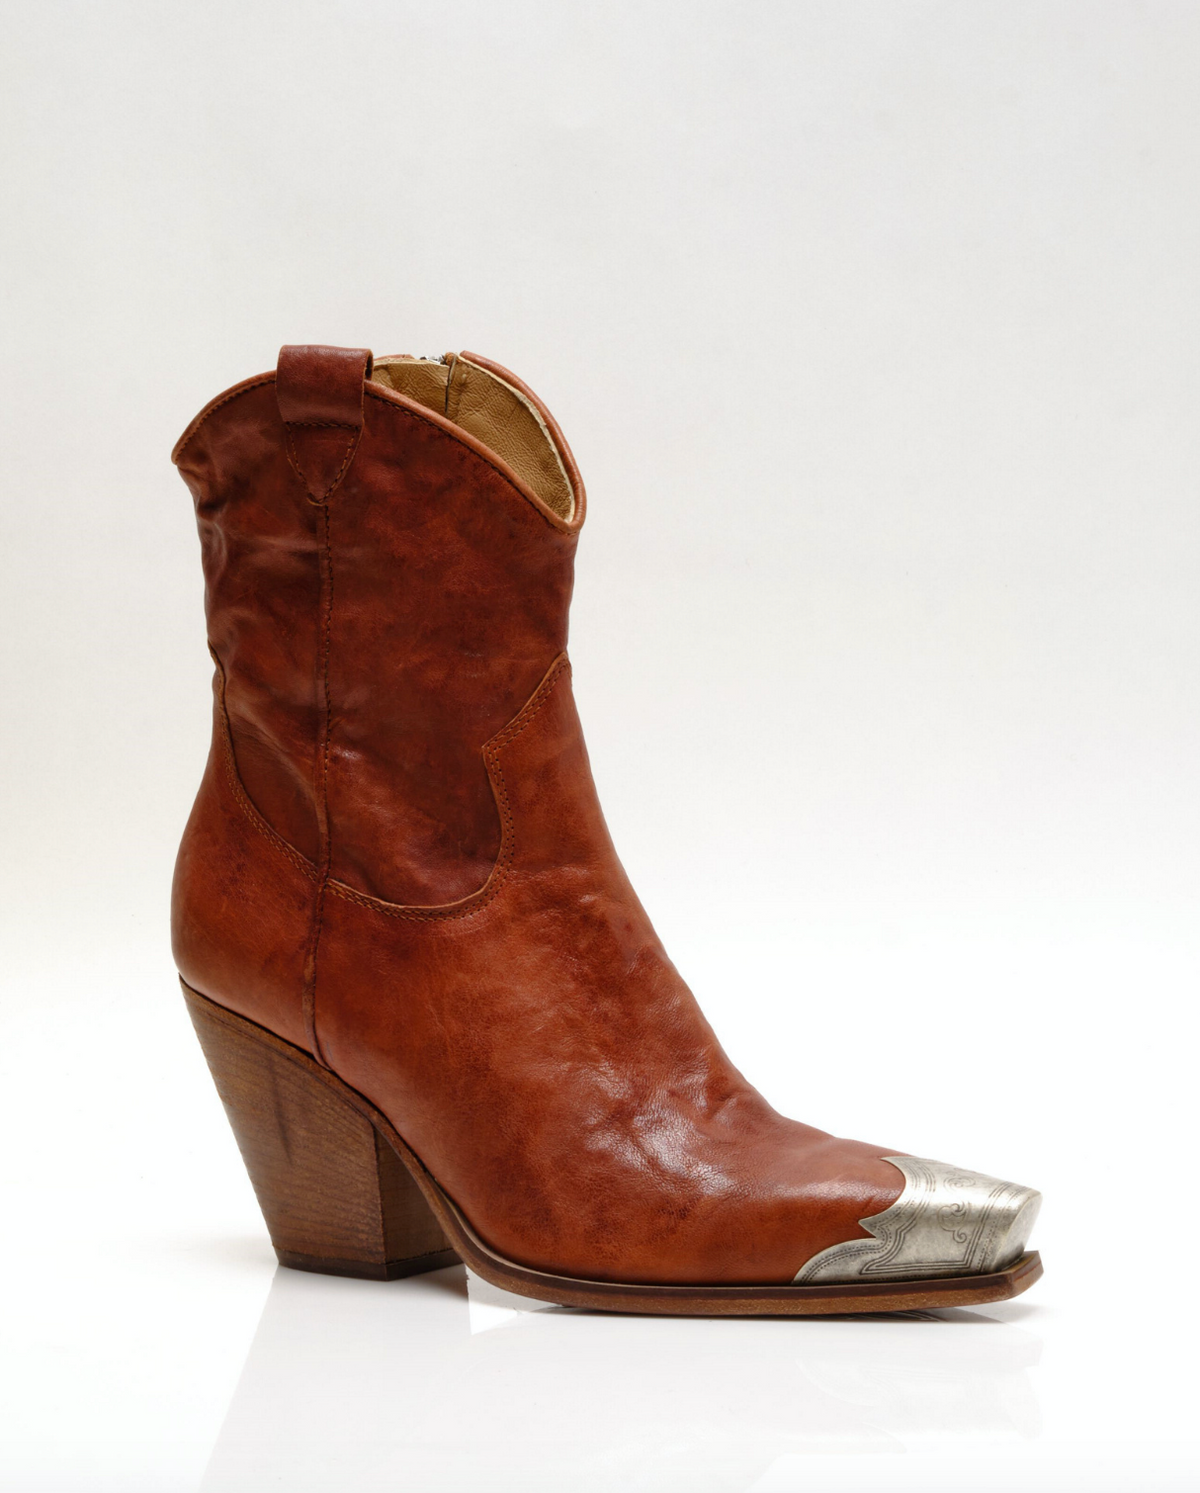 Brayden Western Boots Cody And Sioux, 48% OFF